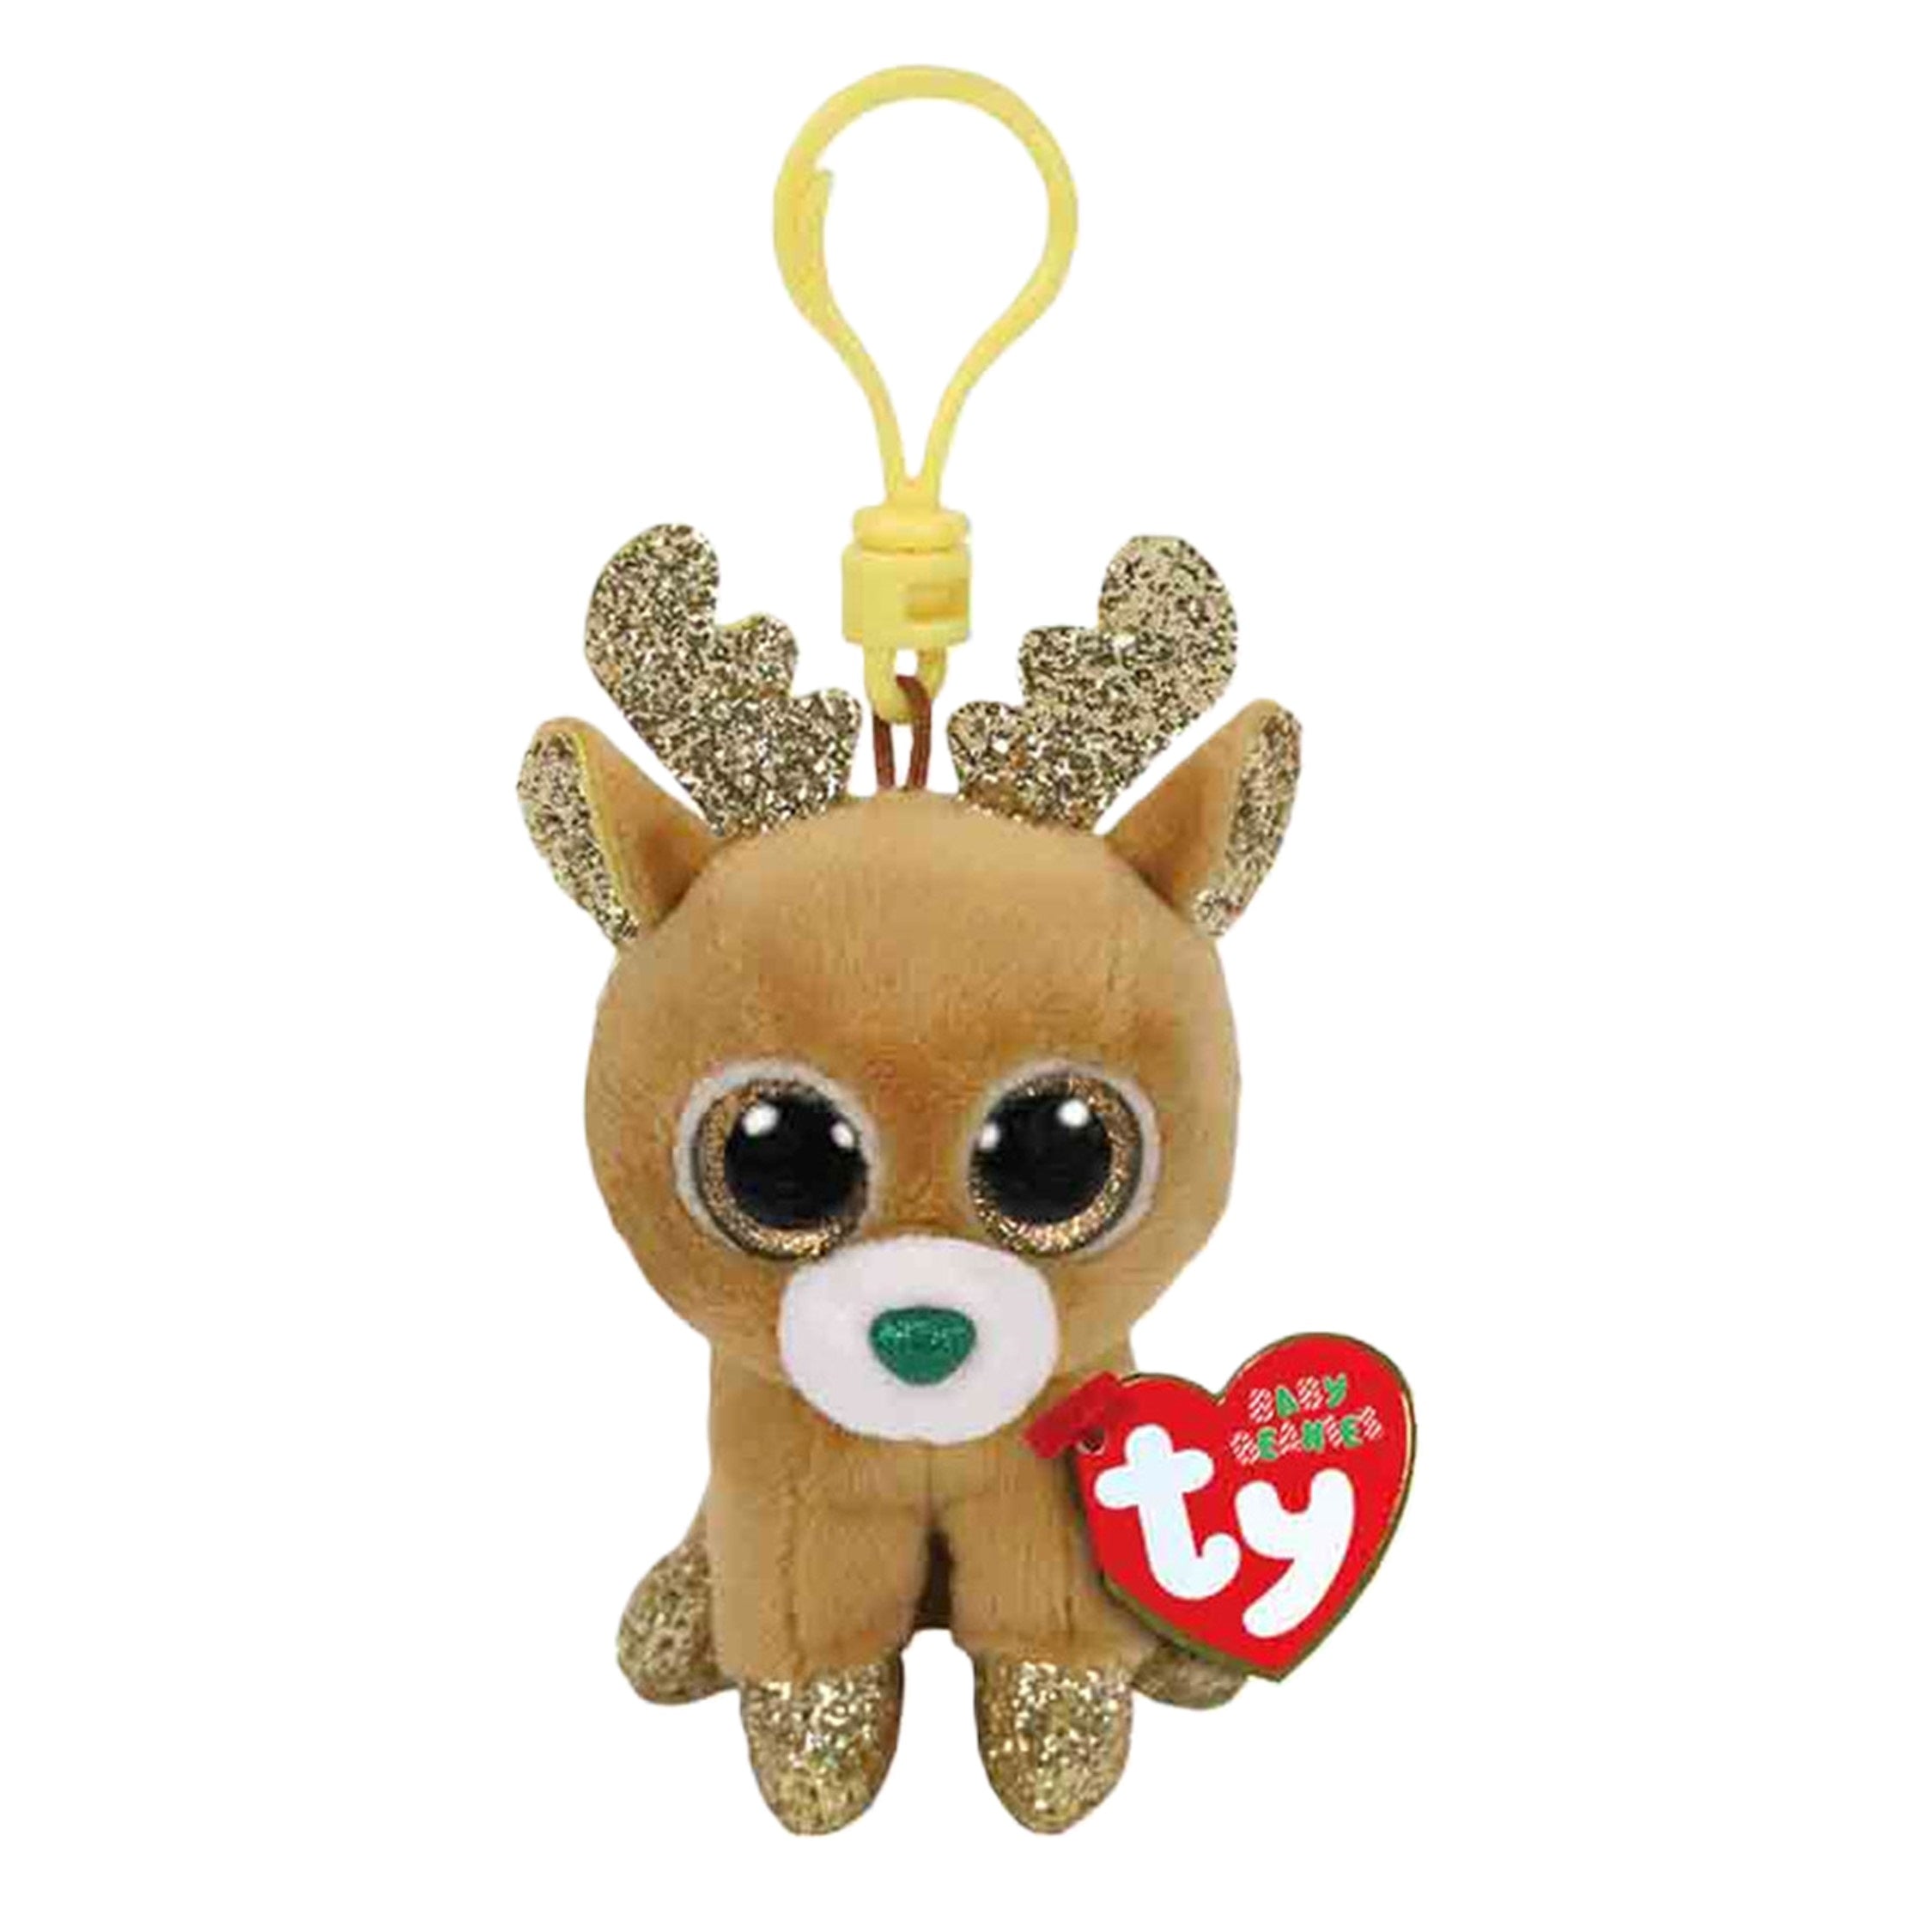 Beanie Boo "retired" Holiday Collection - Keychains